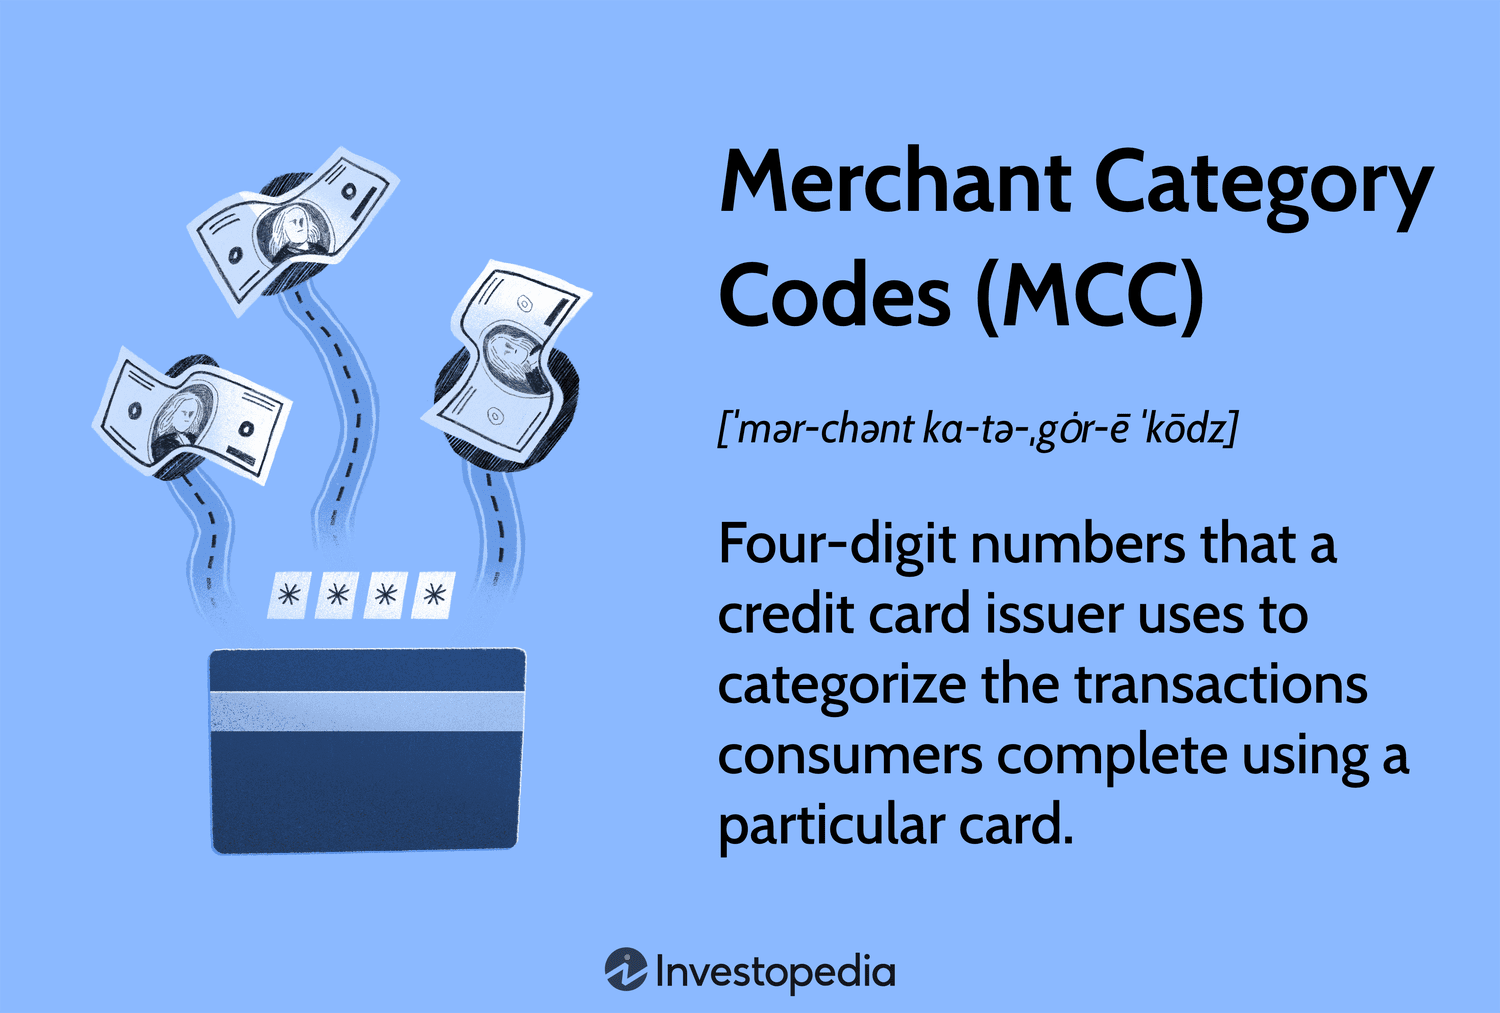 Merchant Category Codes (MCC): what are they and why they’re important